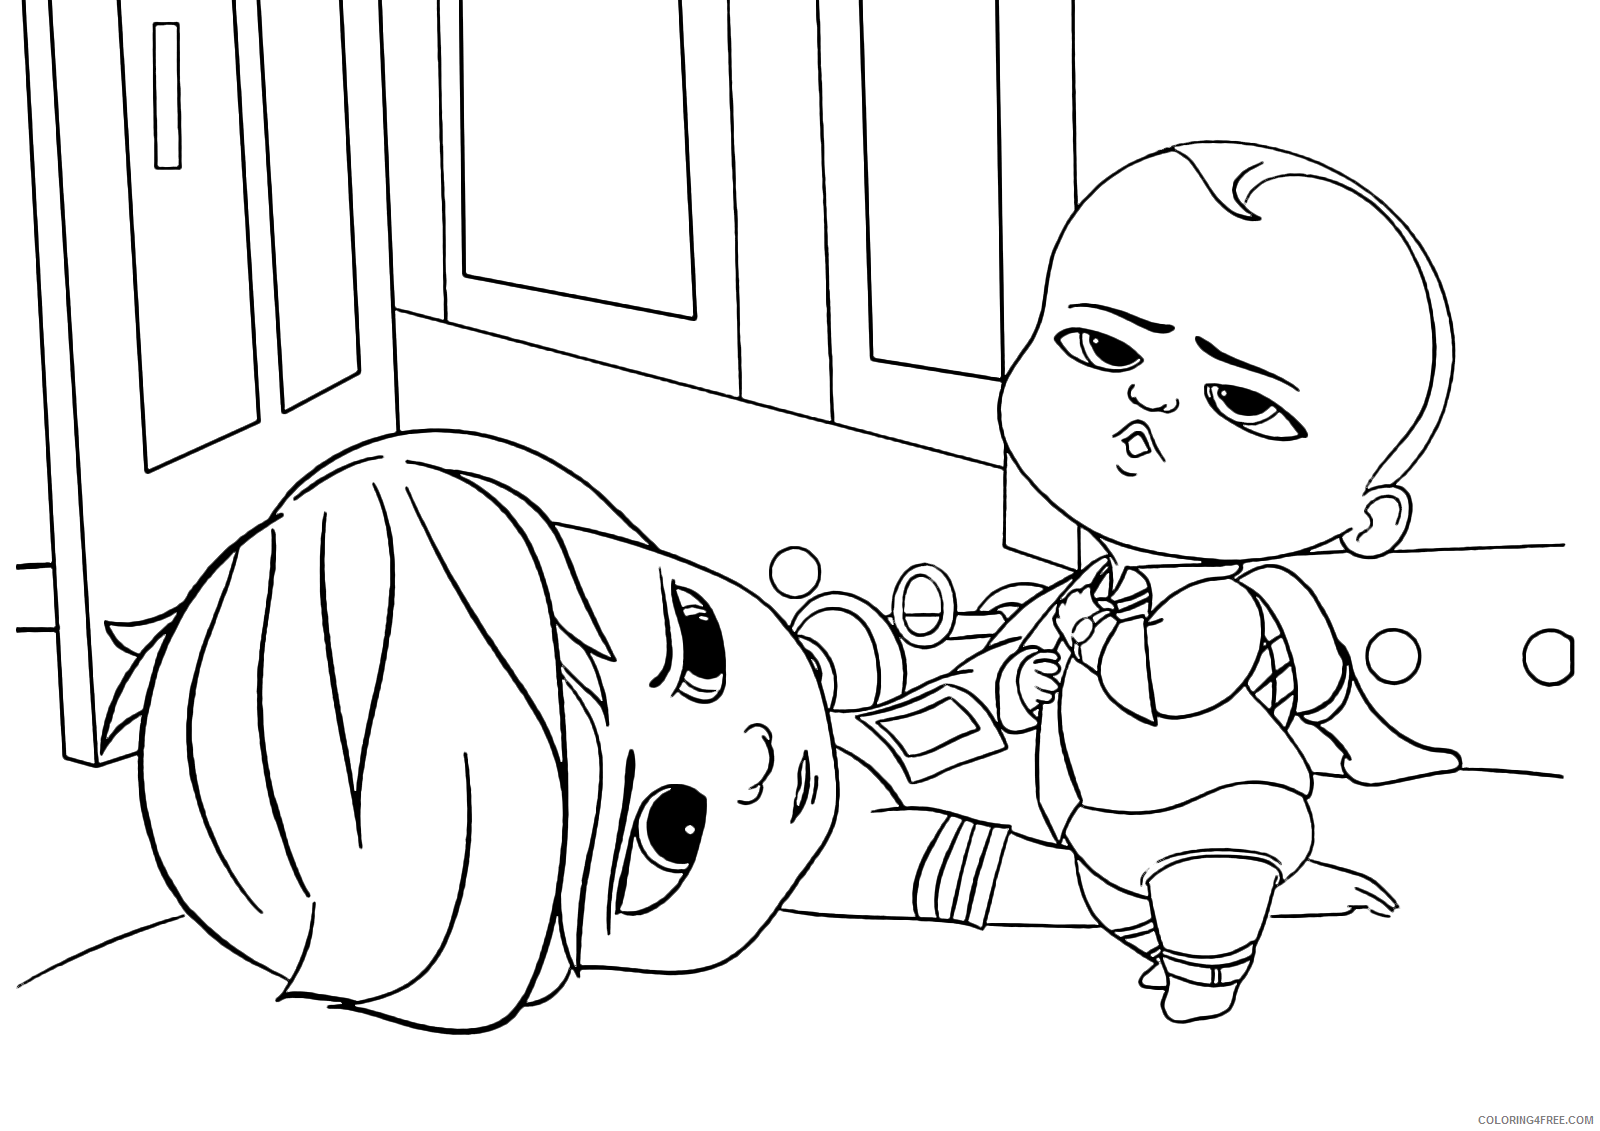 Boss Baby Coloring Pages TV Film Dreamworks Boss Baby Printable 2020 01274 Coloring4free